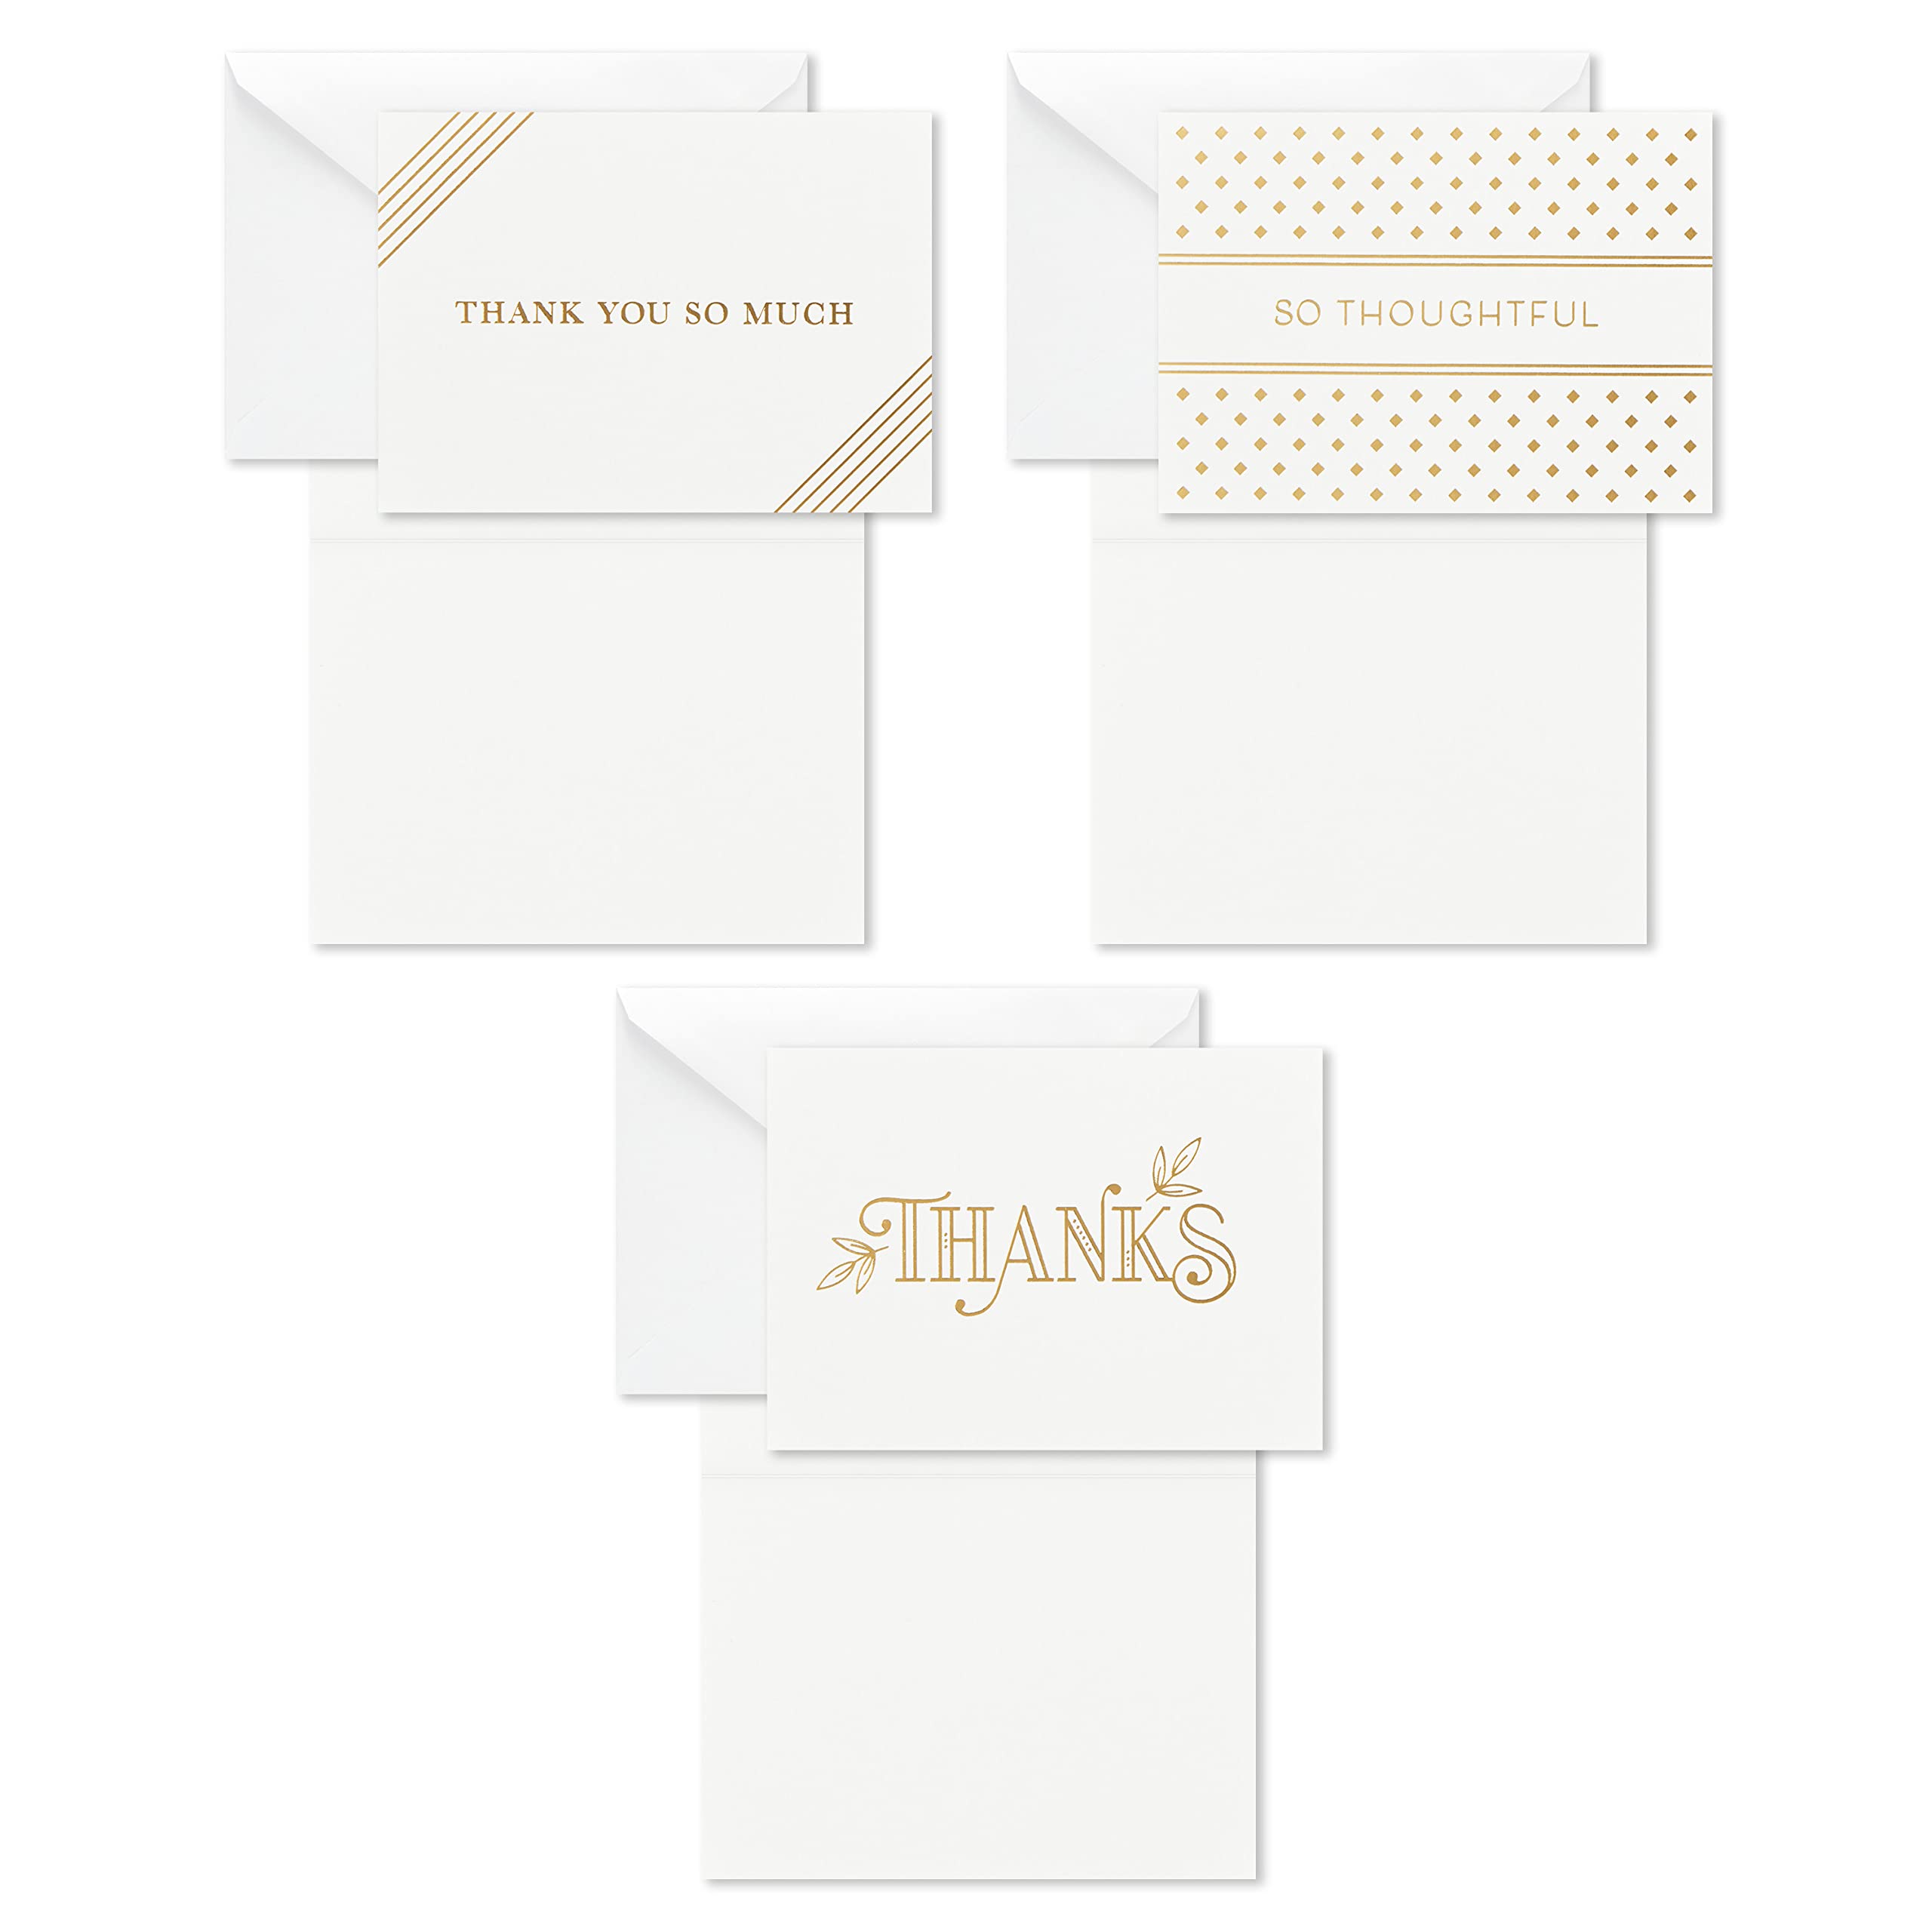 Hallmark Thank You Cards Assortment, Gold Foil (120 Thank You Notes with Envelopes for Wedding, Bridal Shower, Baby Shower, Business, Graduation), White